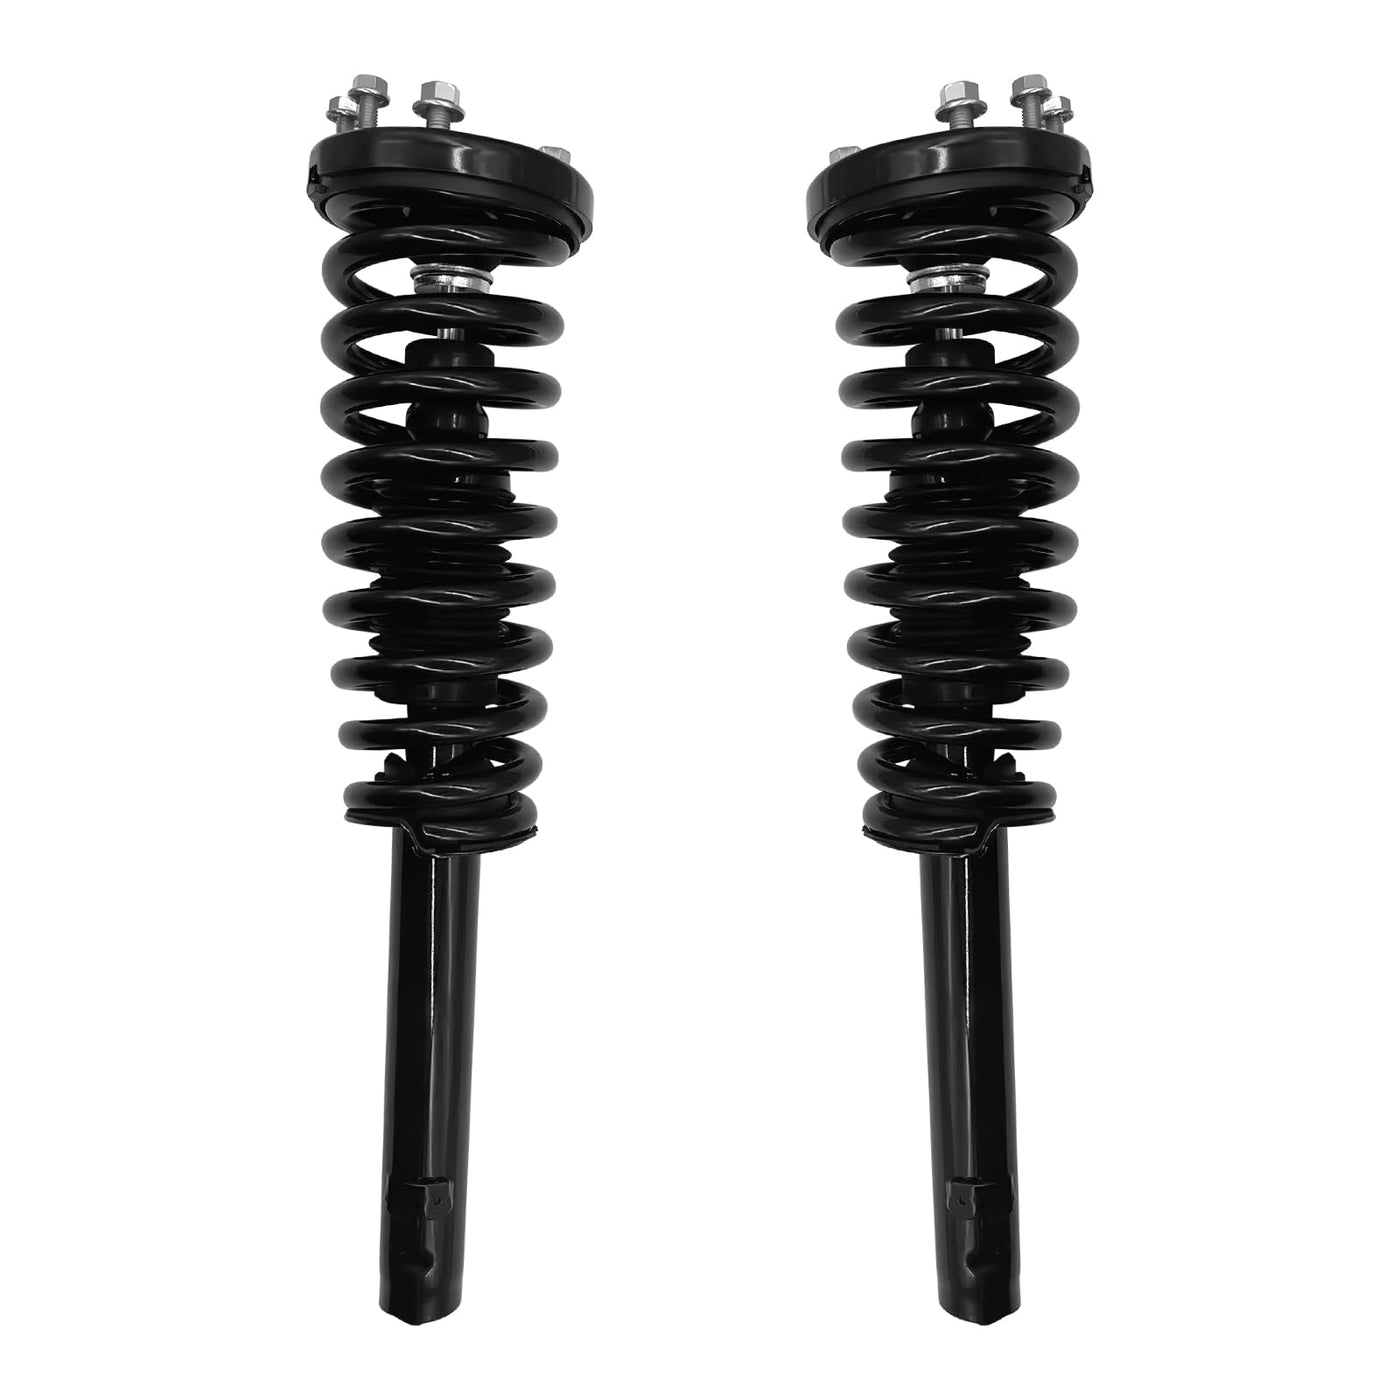 GARVEE Front Pair Complete Strut Spring Assembly Compatible for 2003-2007 Accord - 172123L 172123R